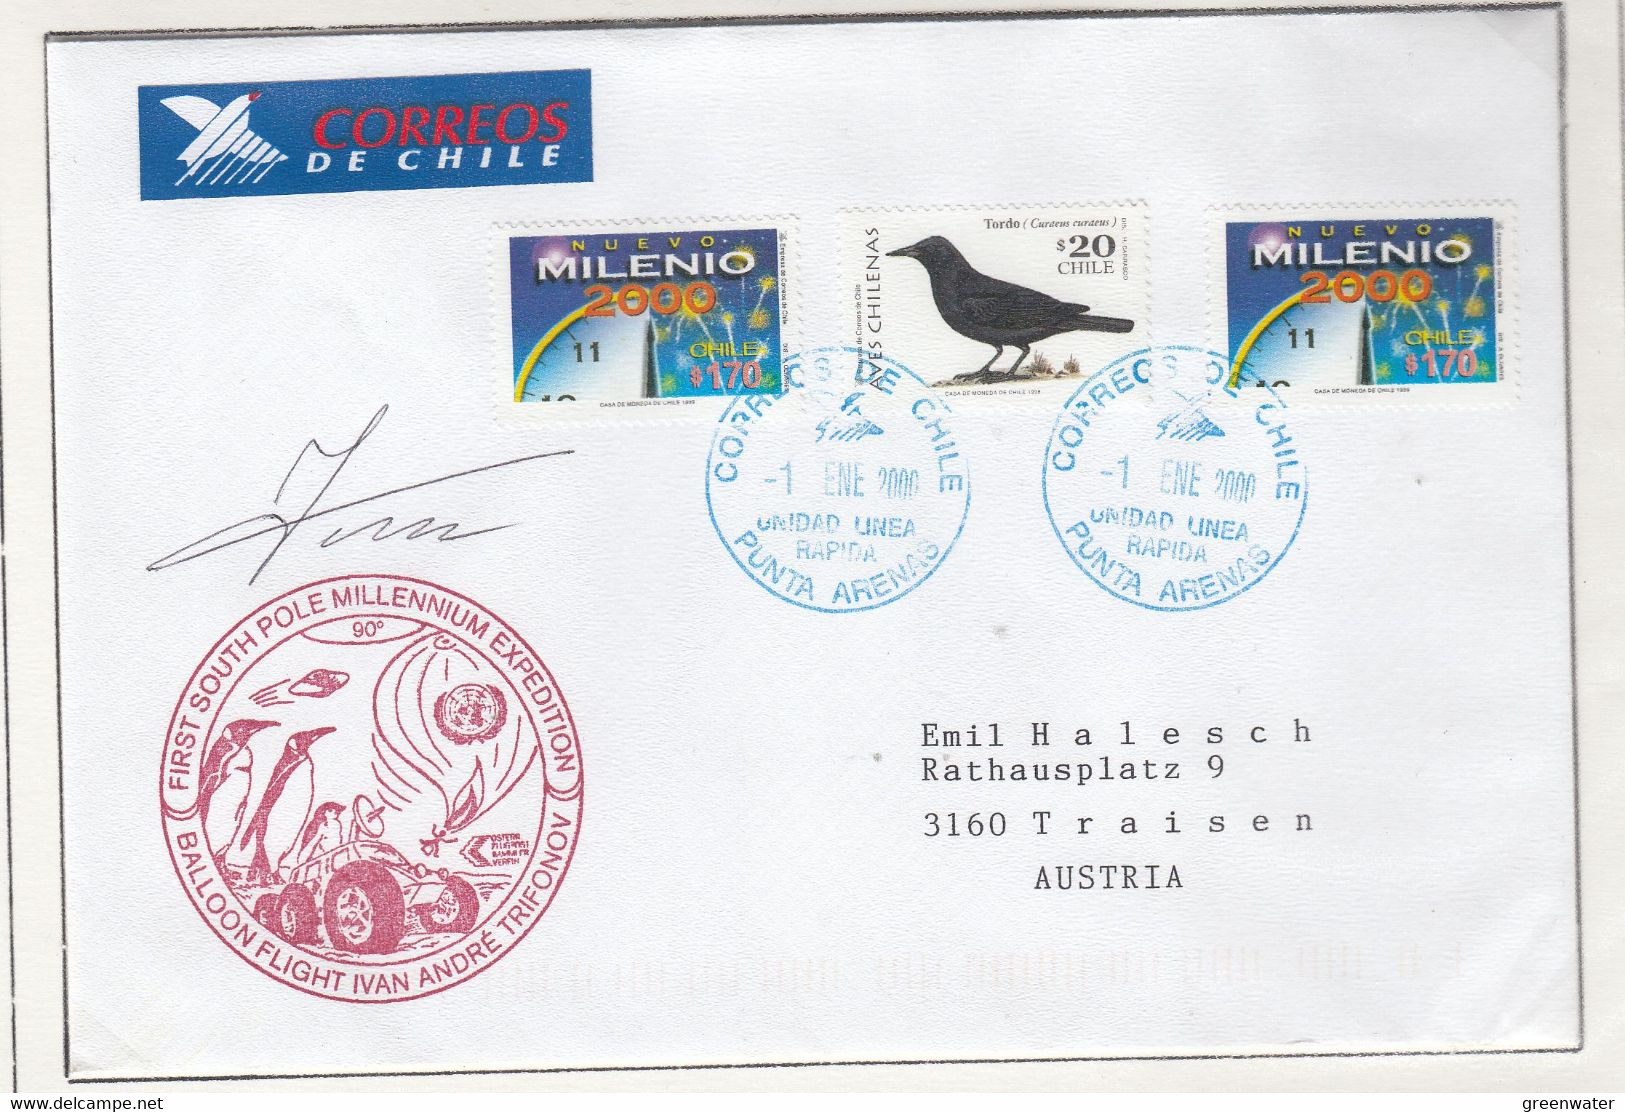 CHILE 2000 First Southpole Balloon Flight  Registered Cover Ca Punta Arenas 1.ENE. 2000 Signature Pilot (CH151B) - Vols Polaires